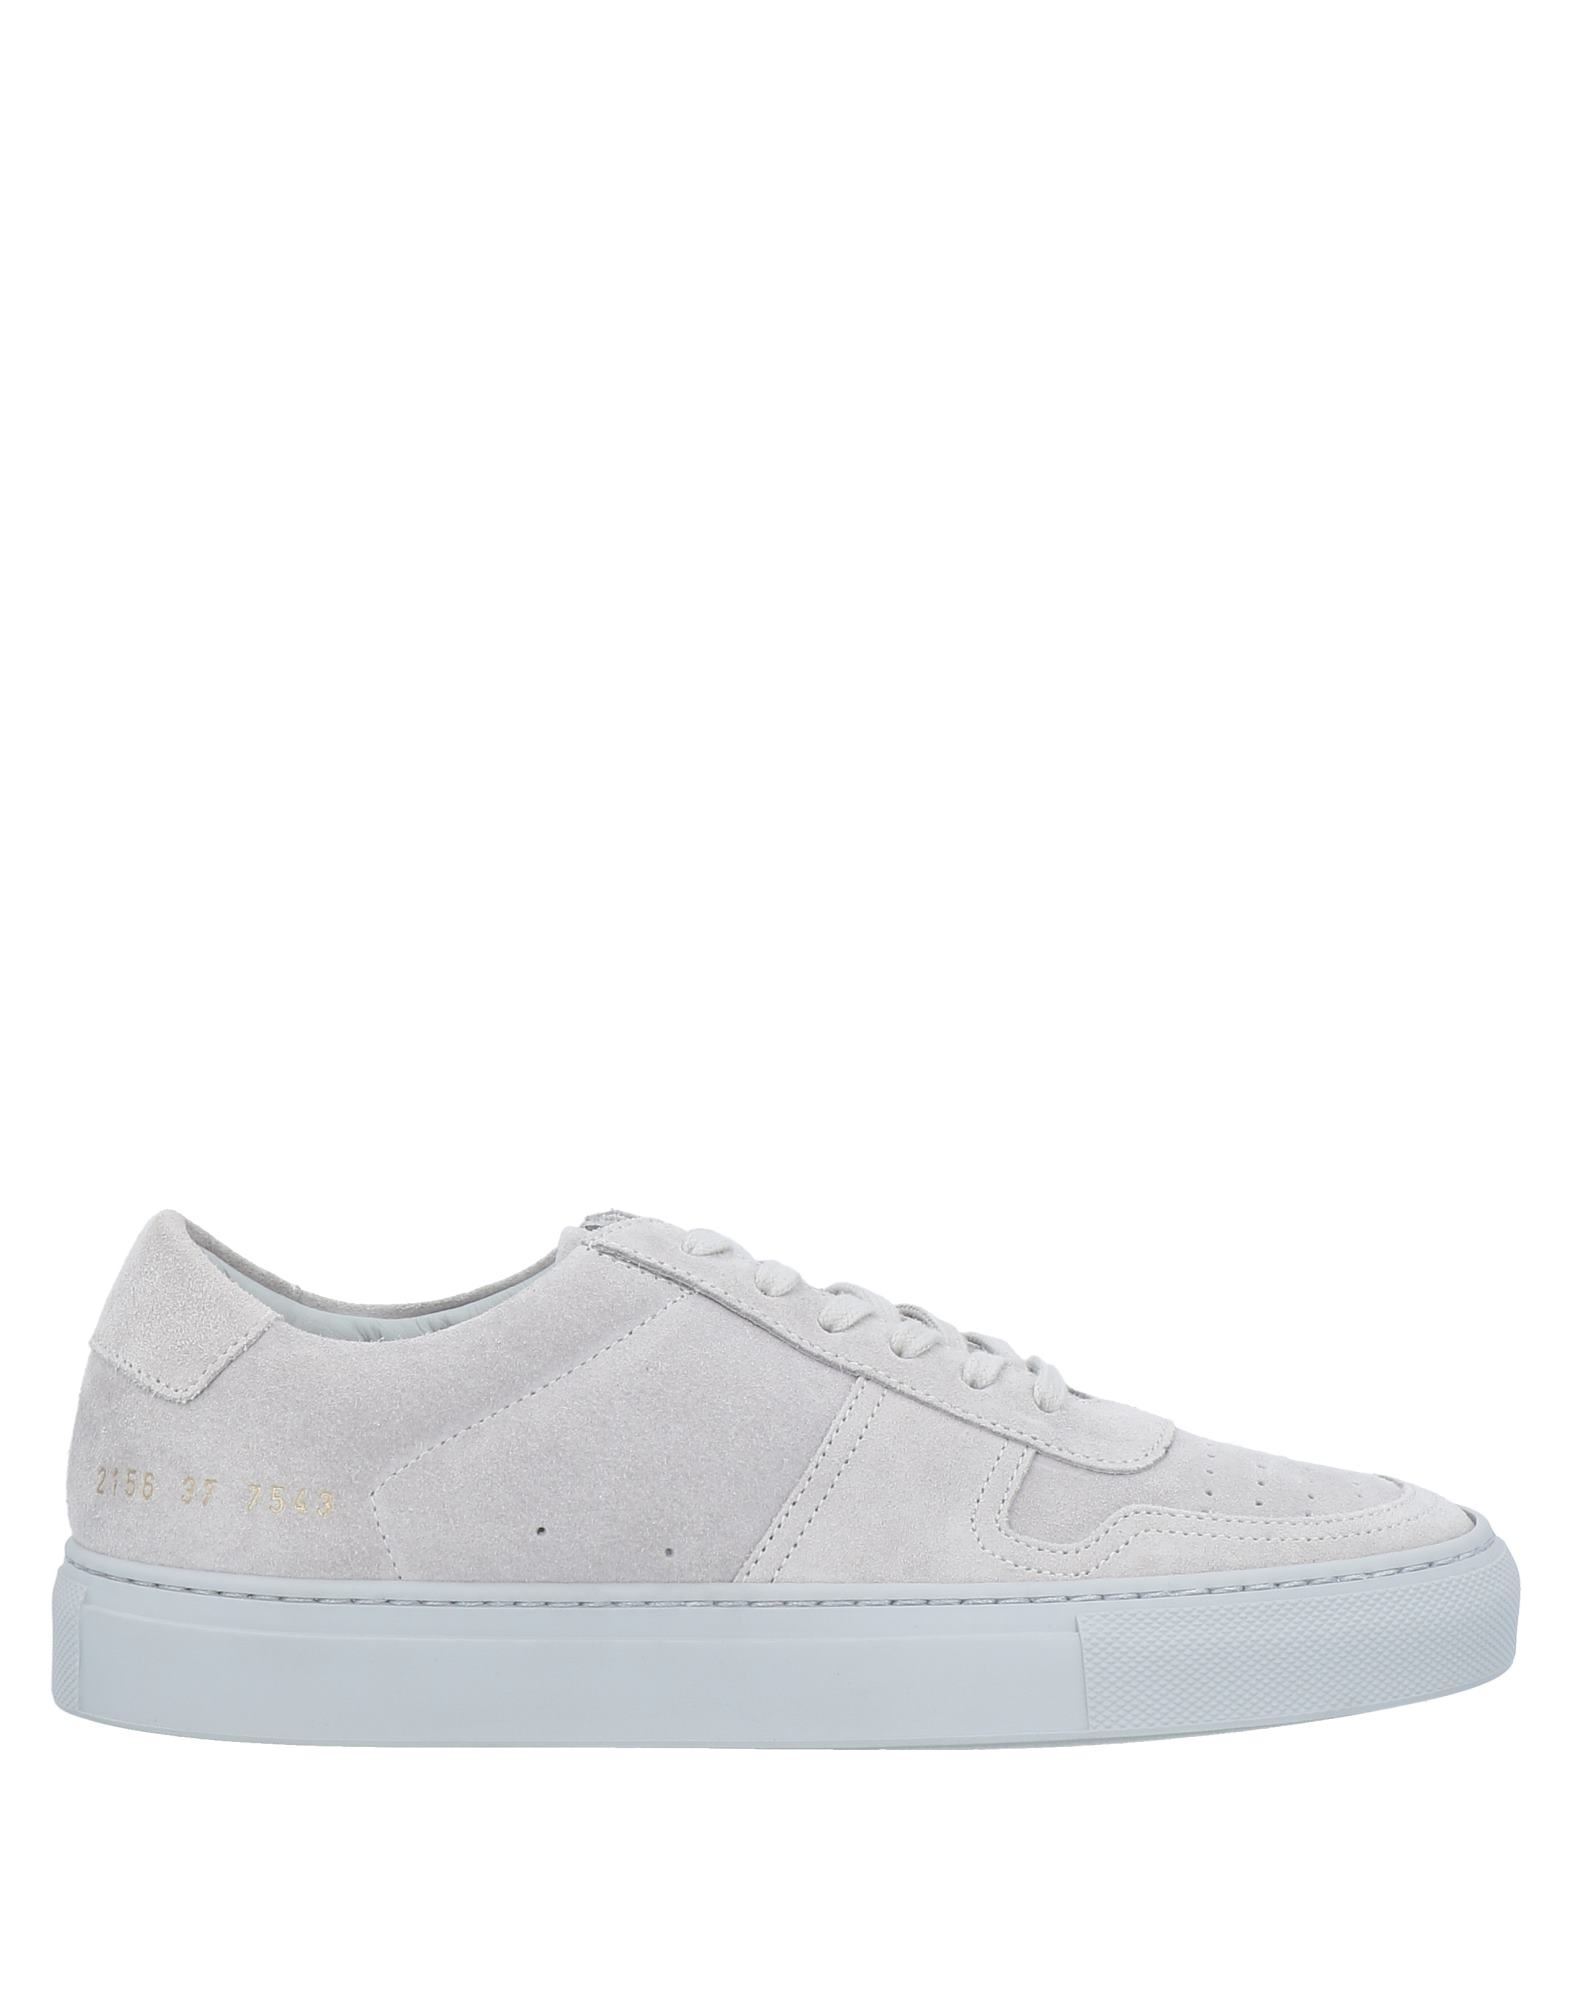 Common Projects Sneakers In Light Grey